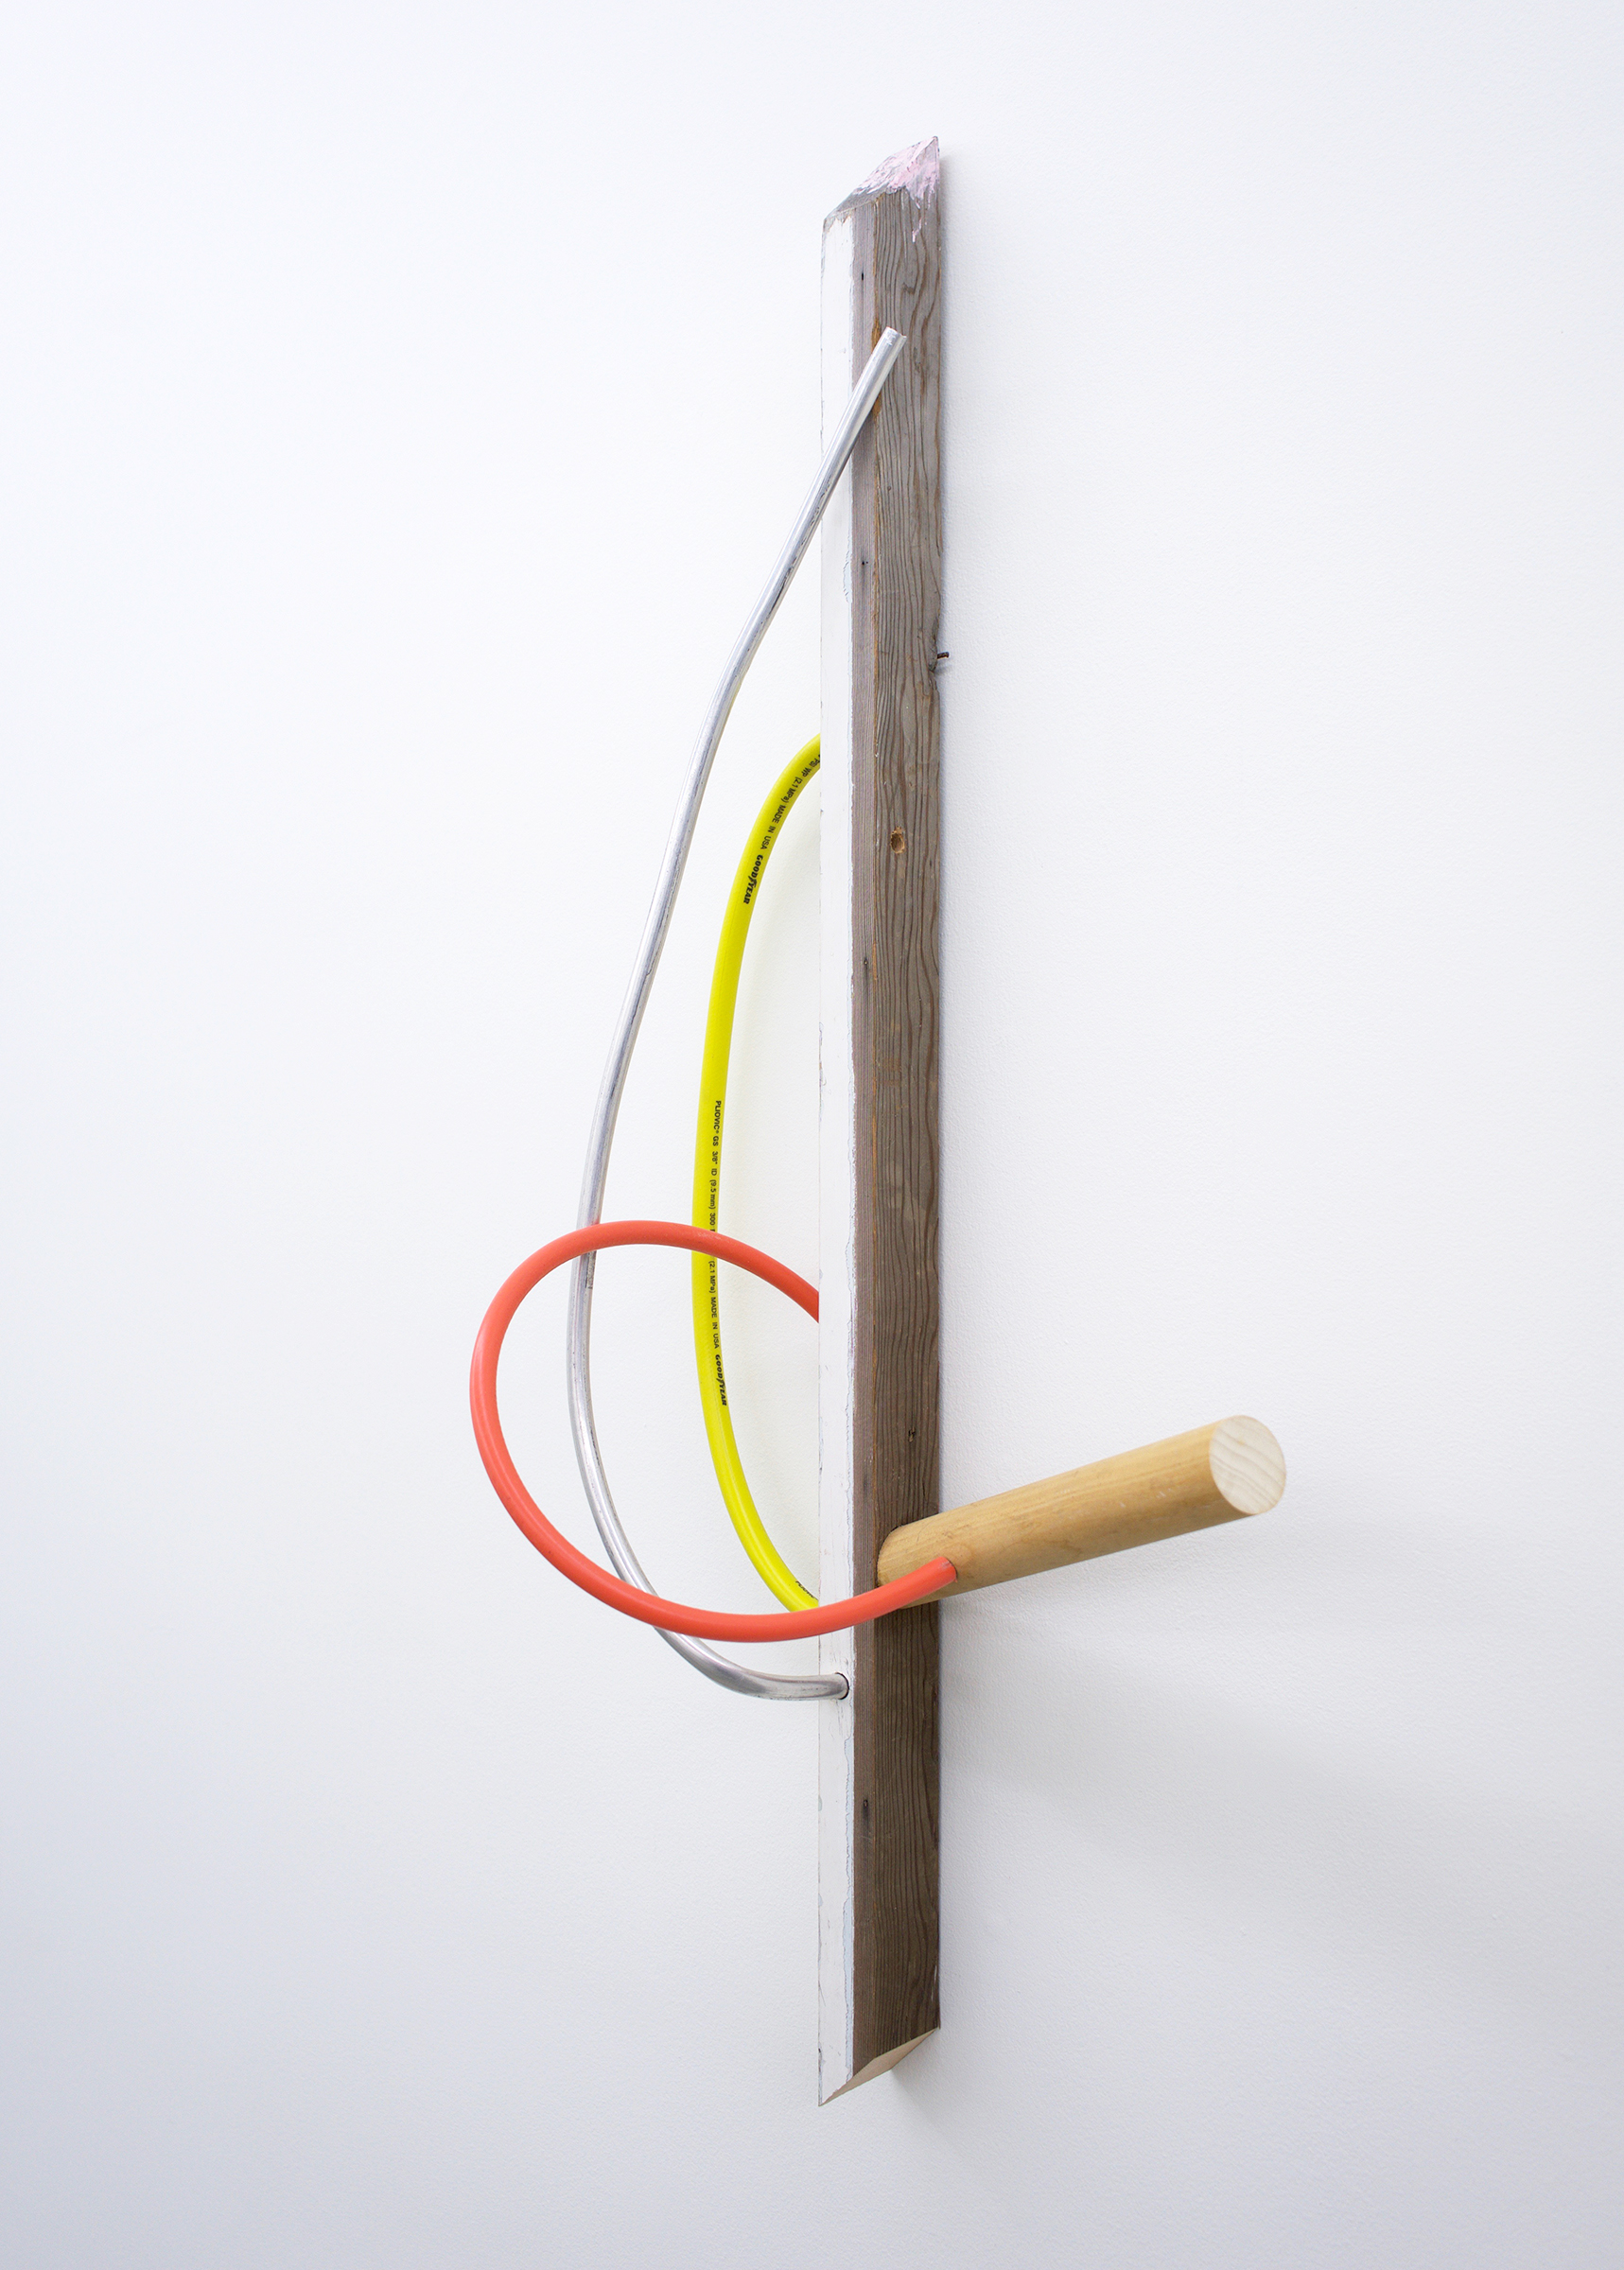  KIRK STOLLER untitled (comb), 2018, wood, paper, stain, metal, 42” x 10” x 17” 